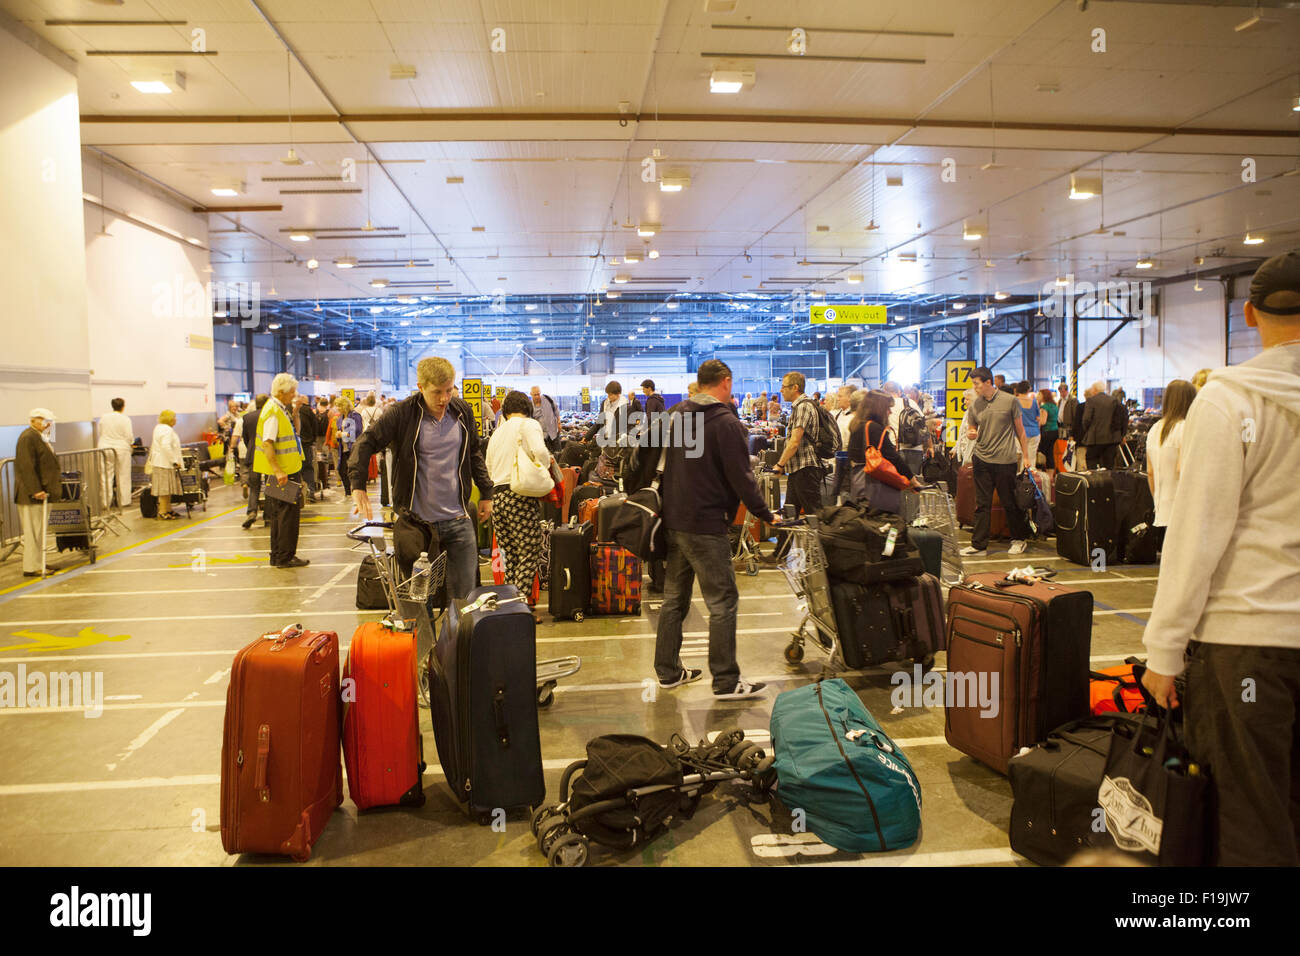 Passengers at the baggage claim area with all their luggage Stock Photo